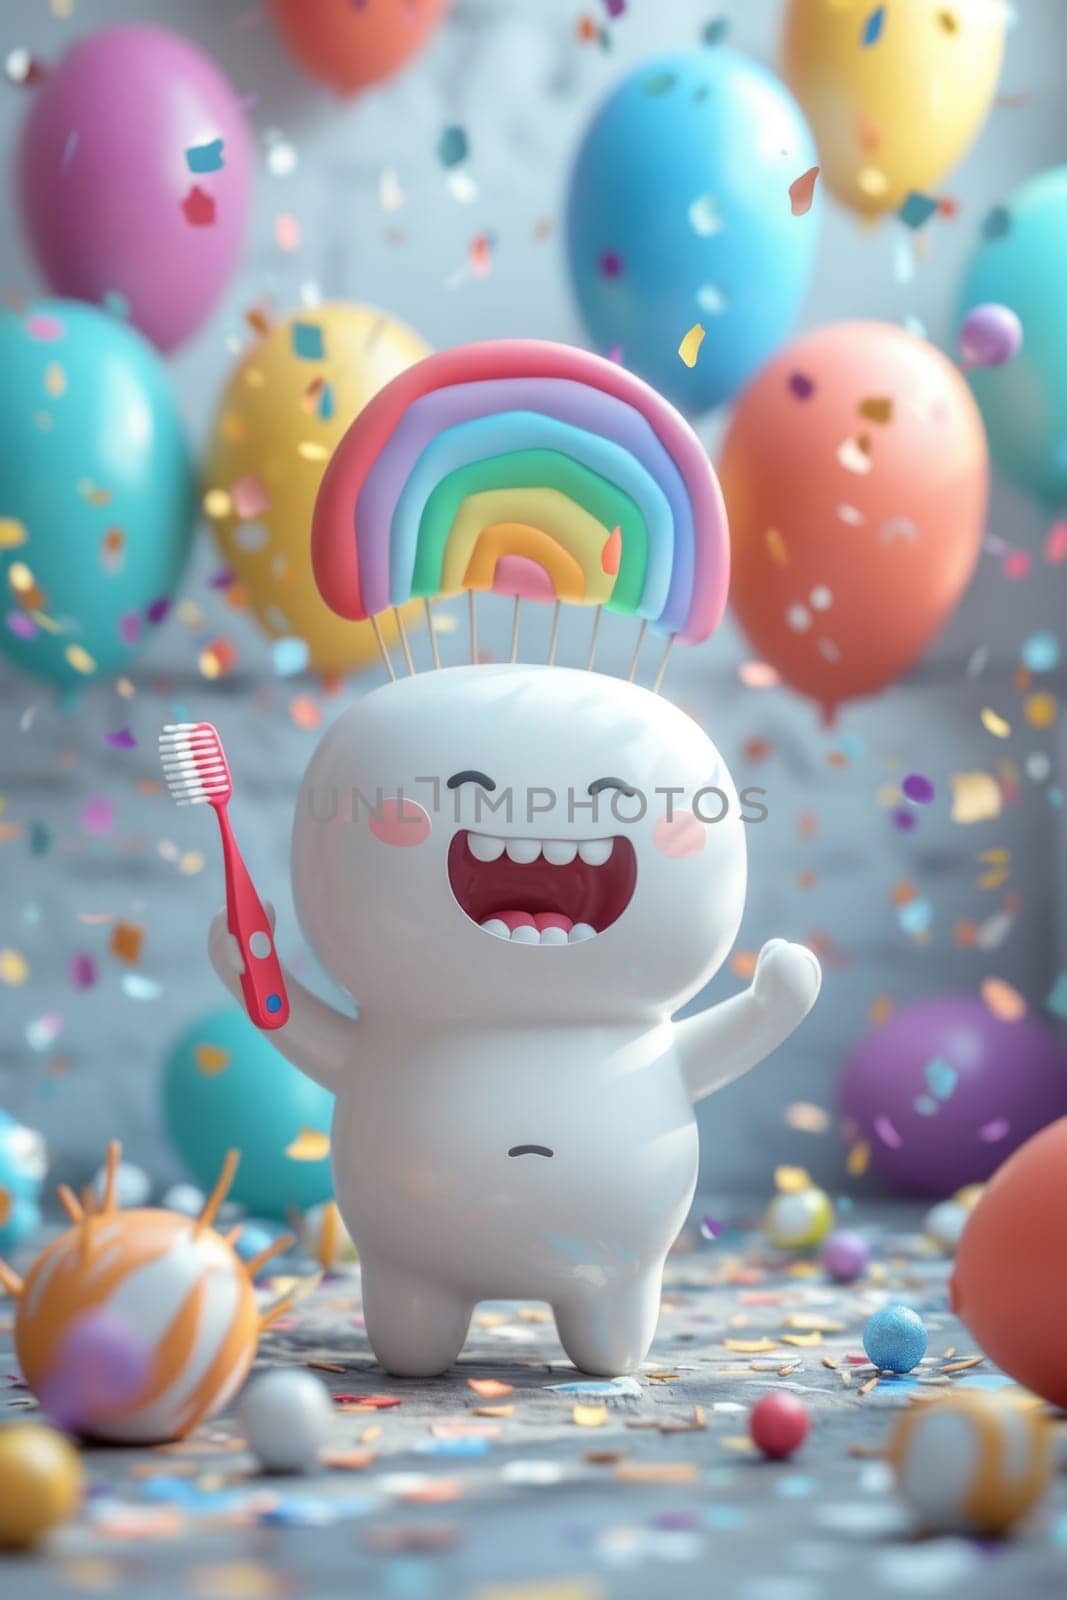 A happy smiling tooth on a festive background with colorful balls. the concept of a clean tooth. 3d illustration.